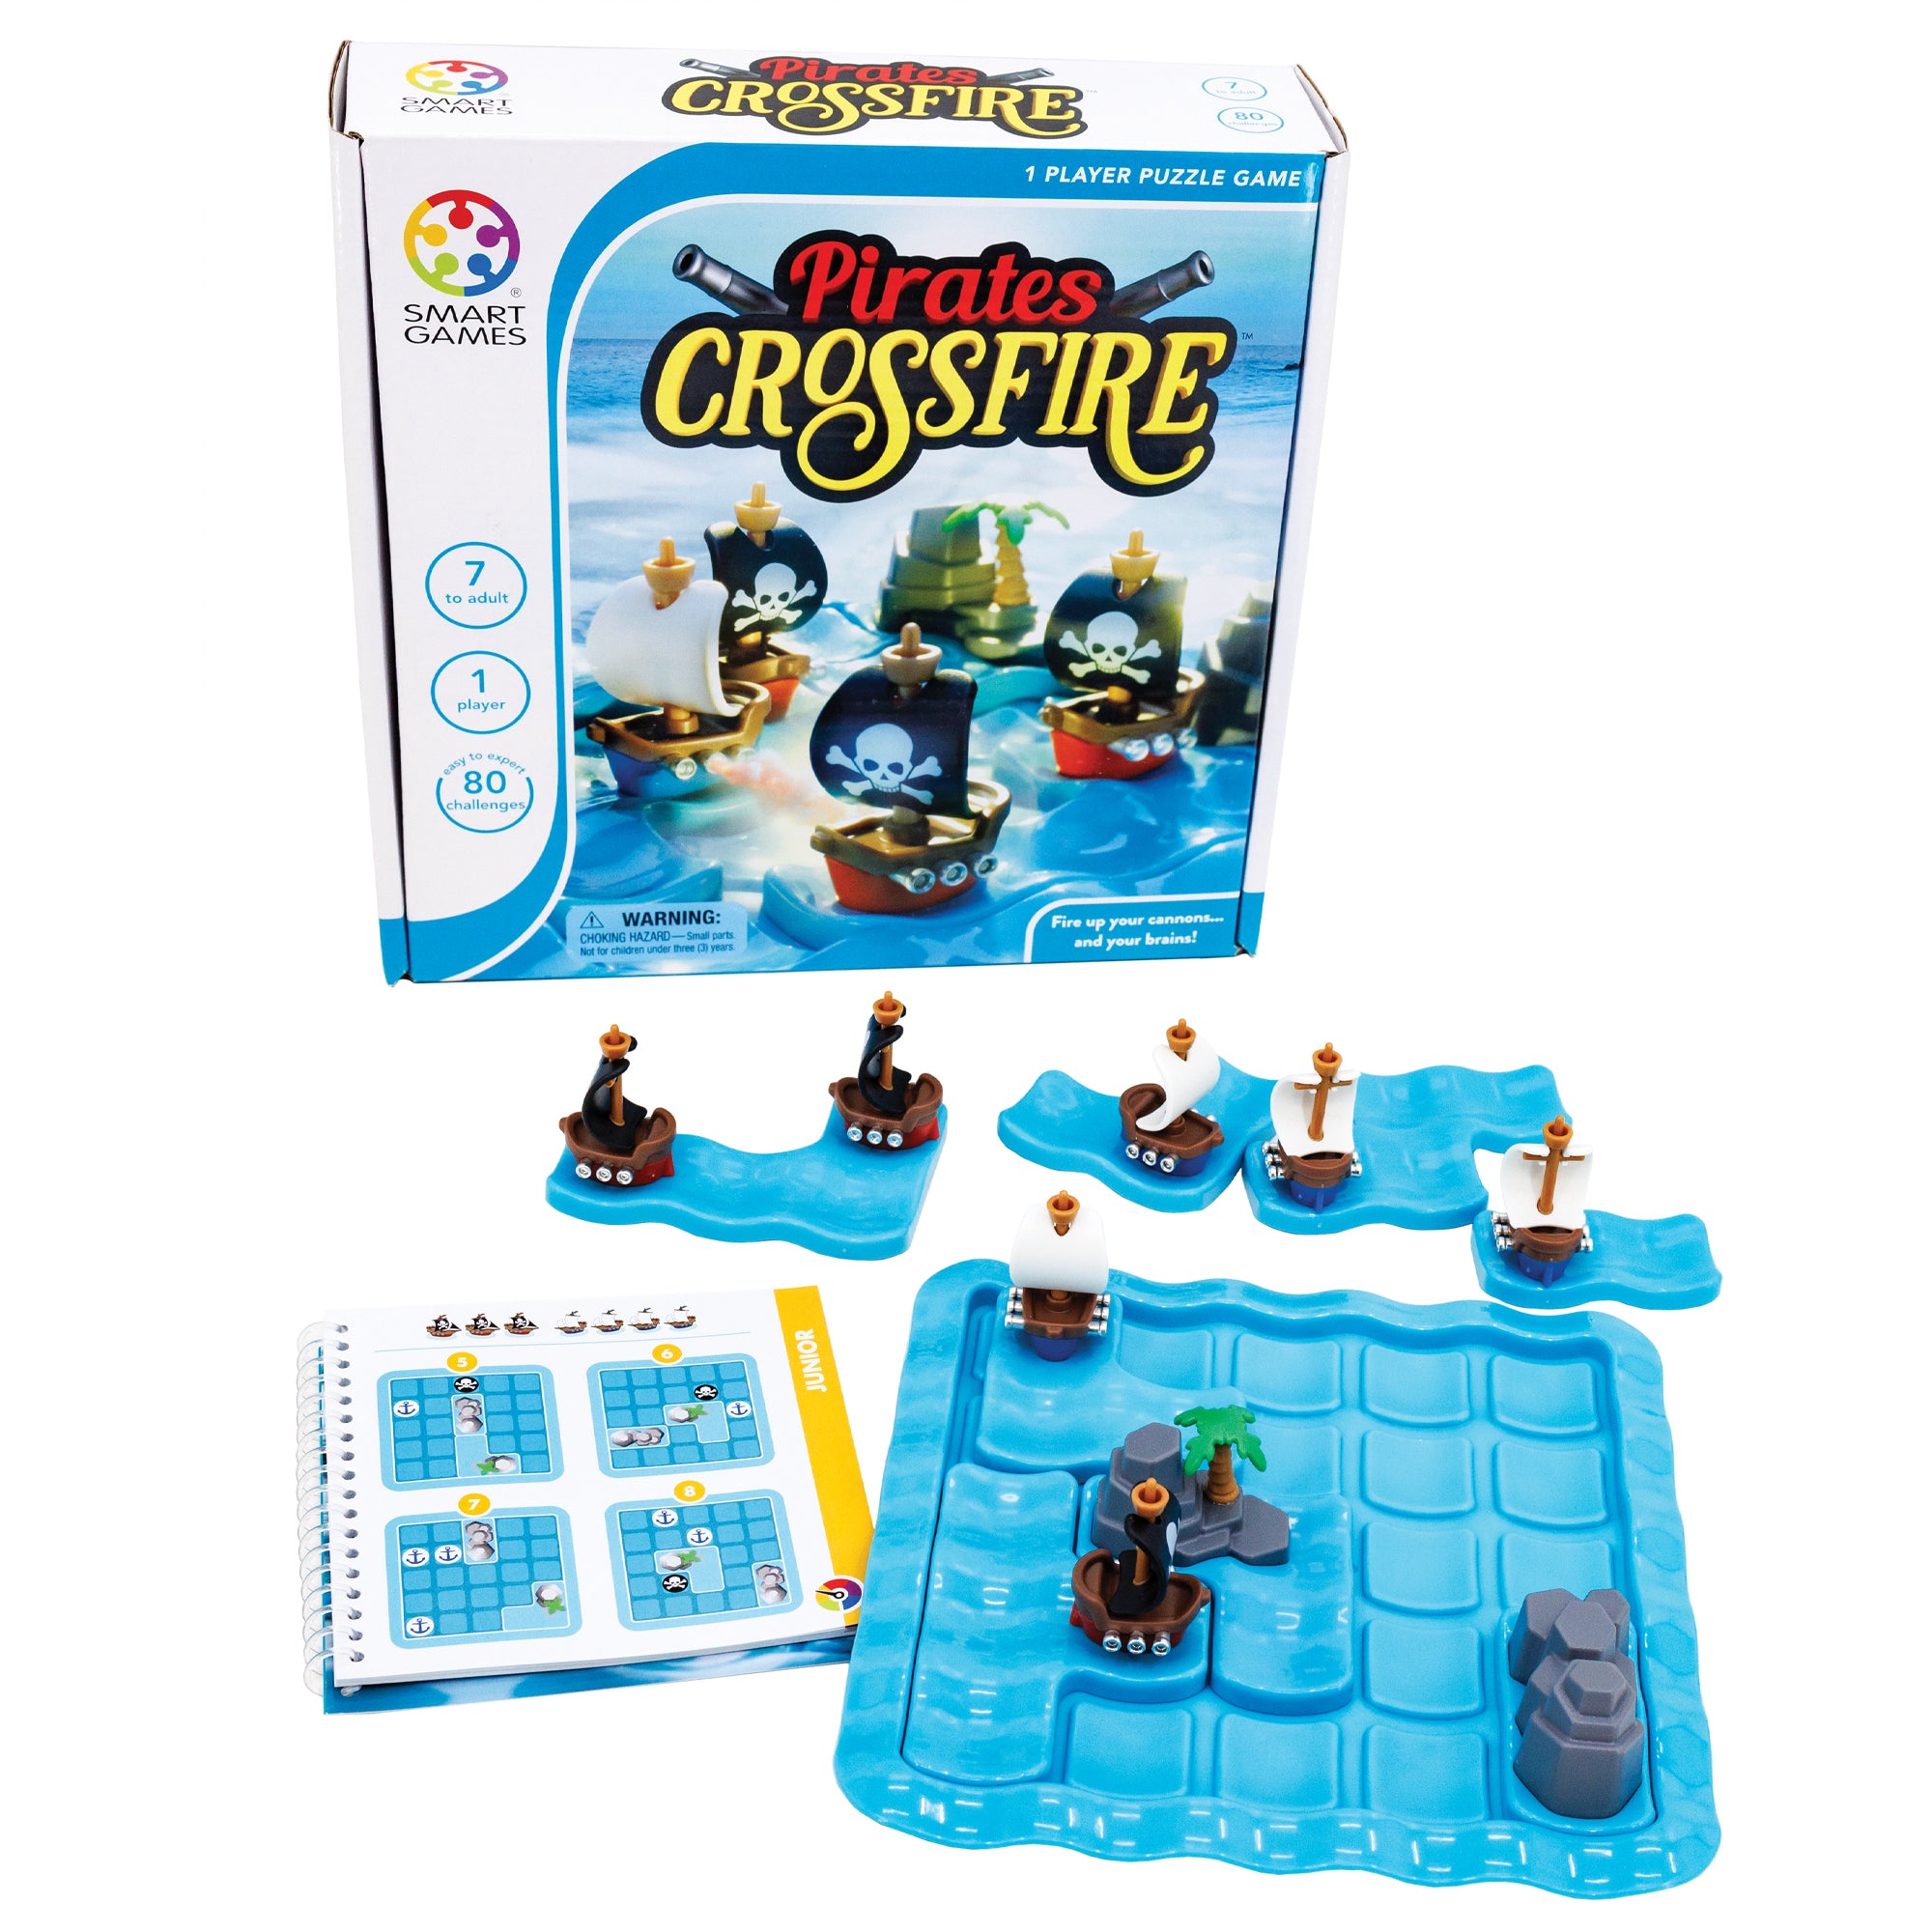 Pirates Crossfire game. The gameboard is blue and wavy in a square shape with rounded corners. There are 4 pieces set in place on the board; one white-sailed ship, one black-sailed ship, and 2 rock pieces. There are 4 ship pieces off the board to the top. On the left is the instruction booklet open to a junior puzzle. The game box in the background shows the game with pieces in play.